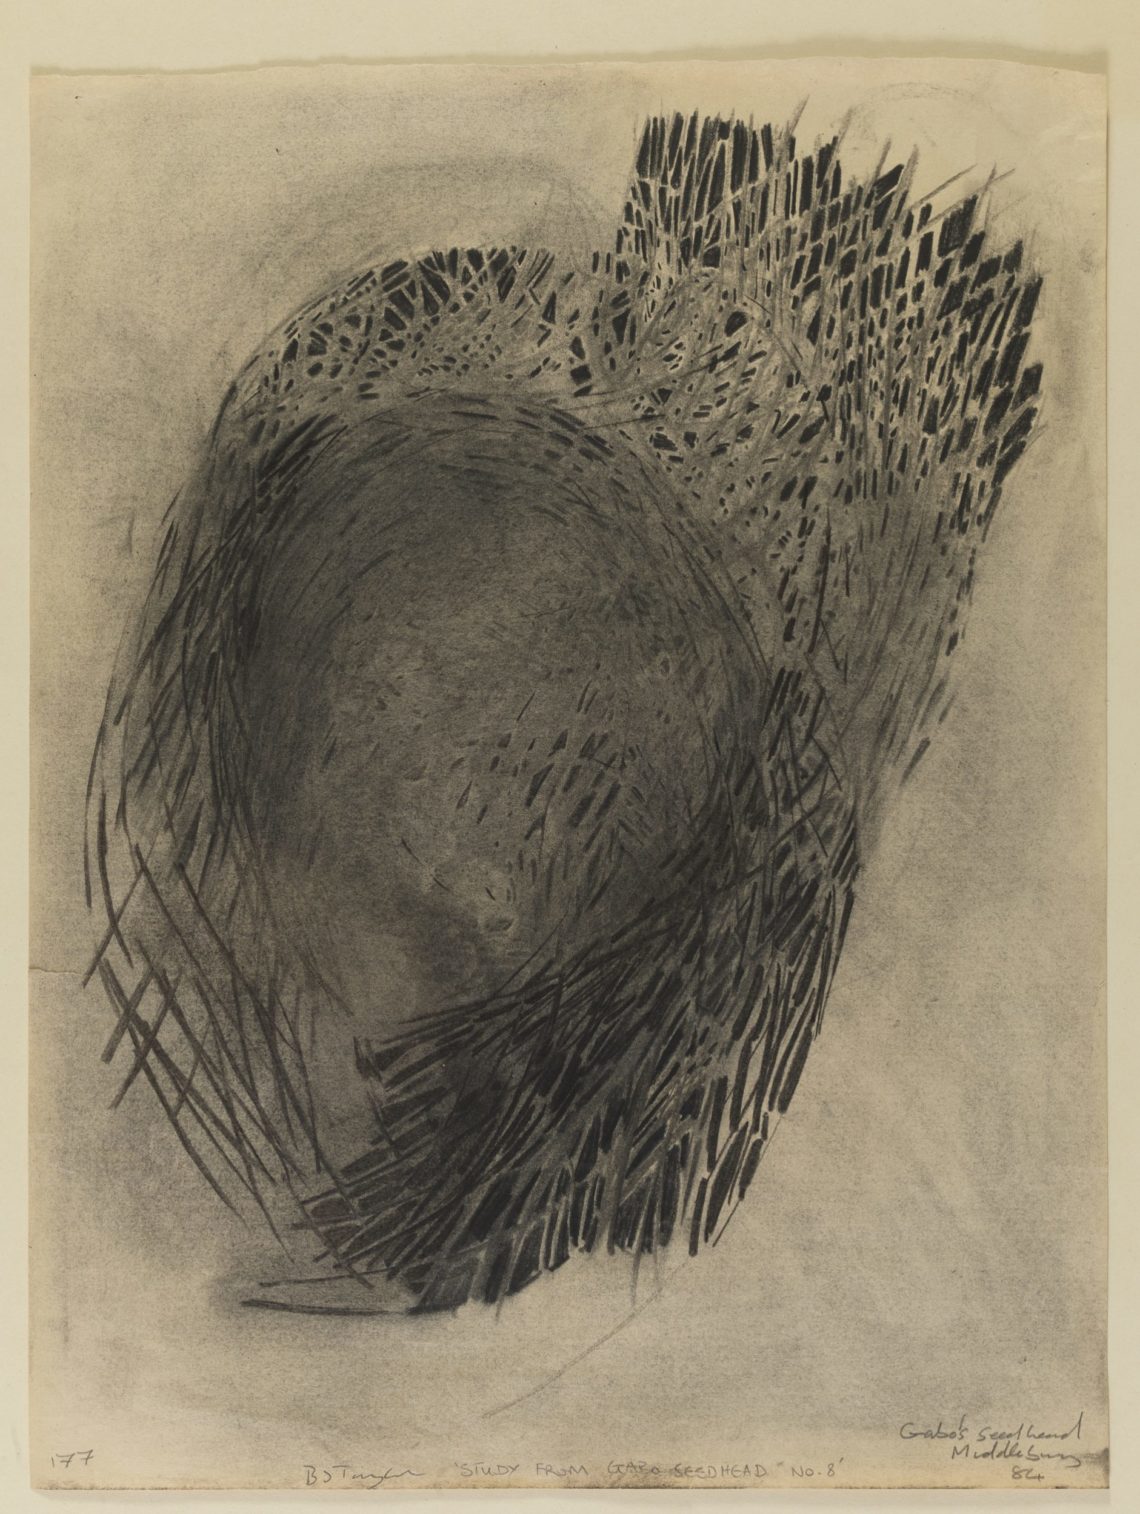 Brian_Taylor_Study_for_Naum_Gabo's_Seed_Head_8